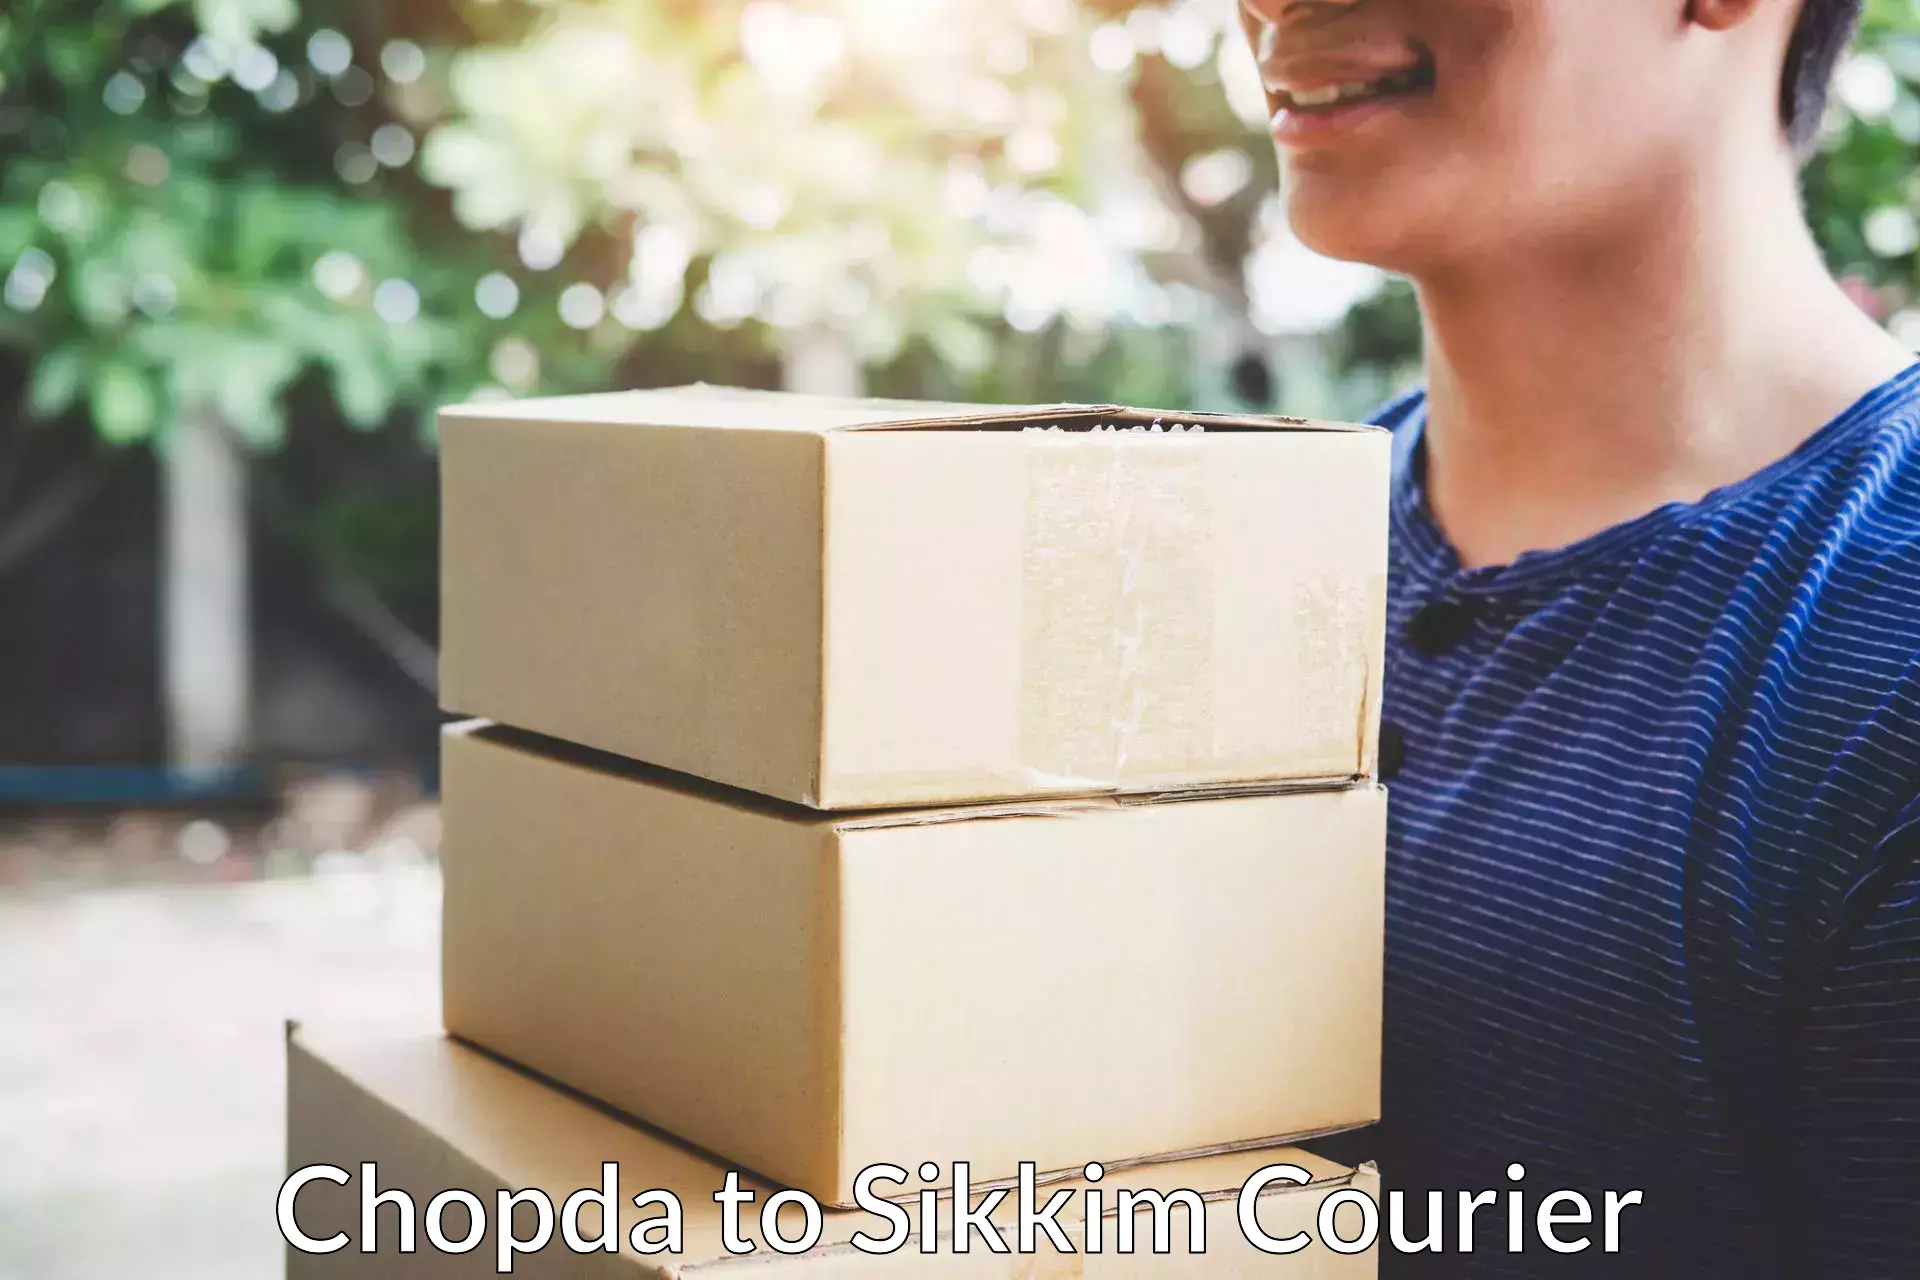 Residential moving experts Chopda to North Sikkim